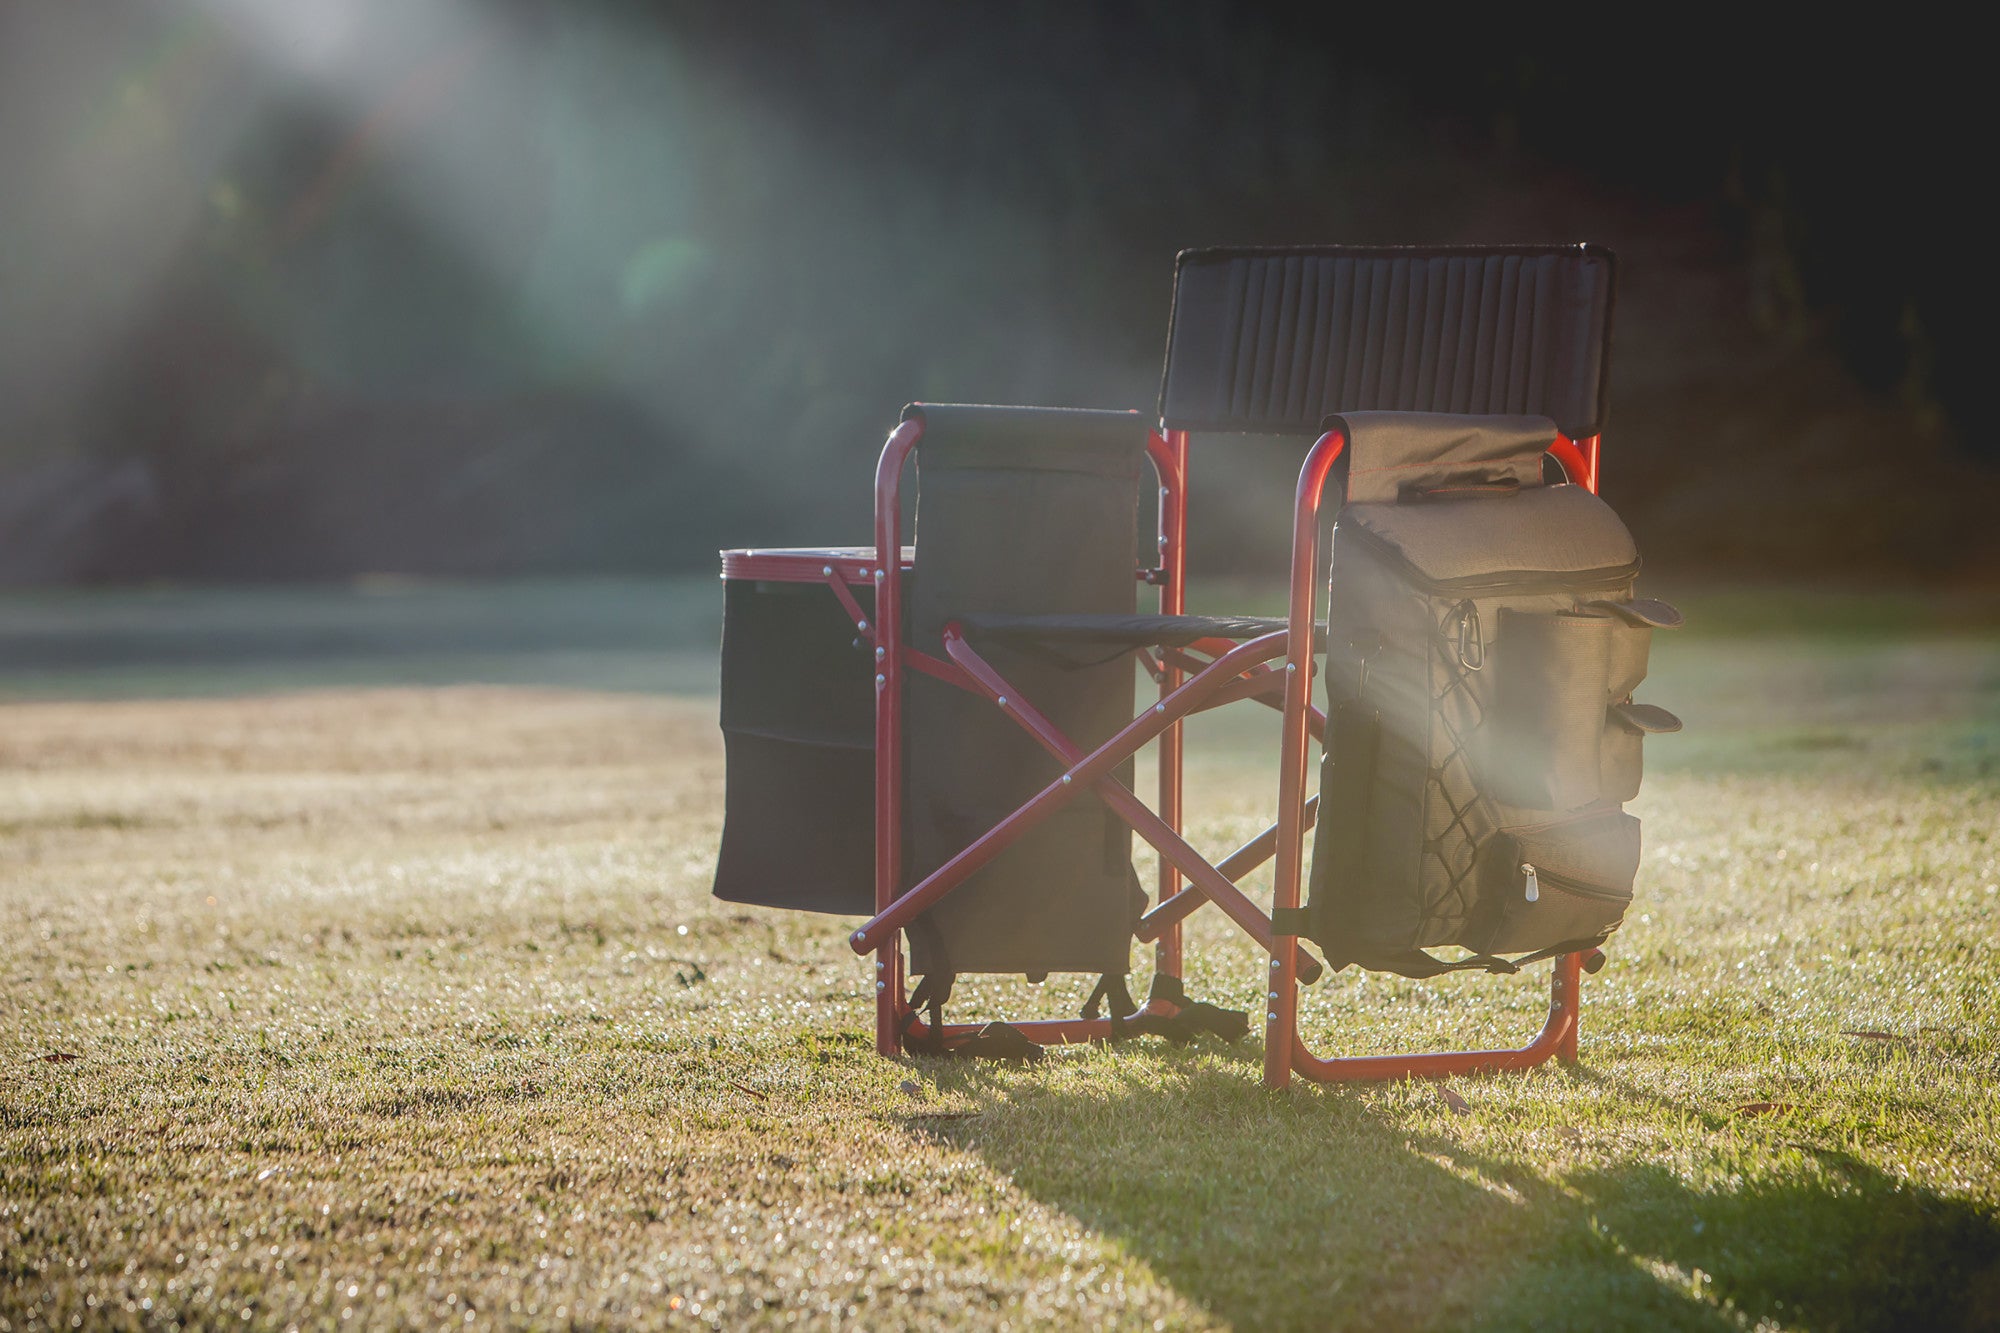 NC State Wolfpack - Fusion Camping Chair